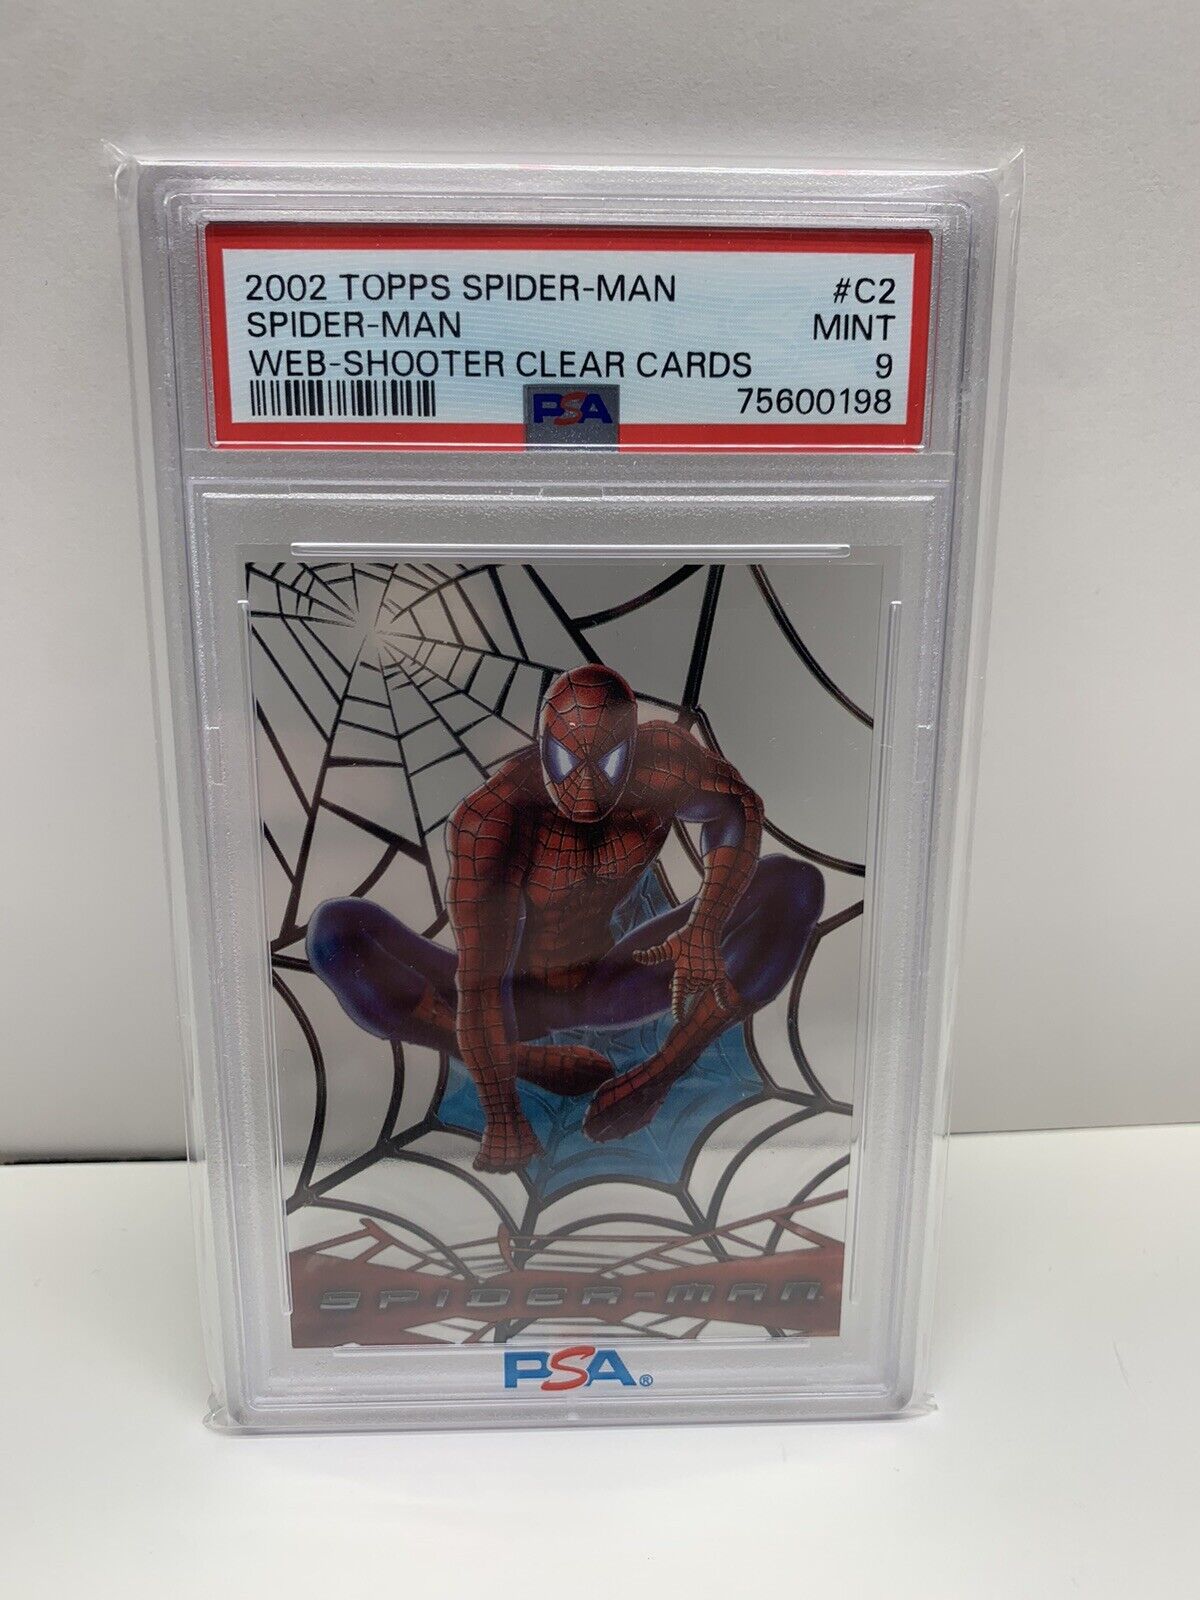 2002 Topps Spider-Man The Movie #C2 Web Shooter Clear Card PSA 9 MINT